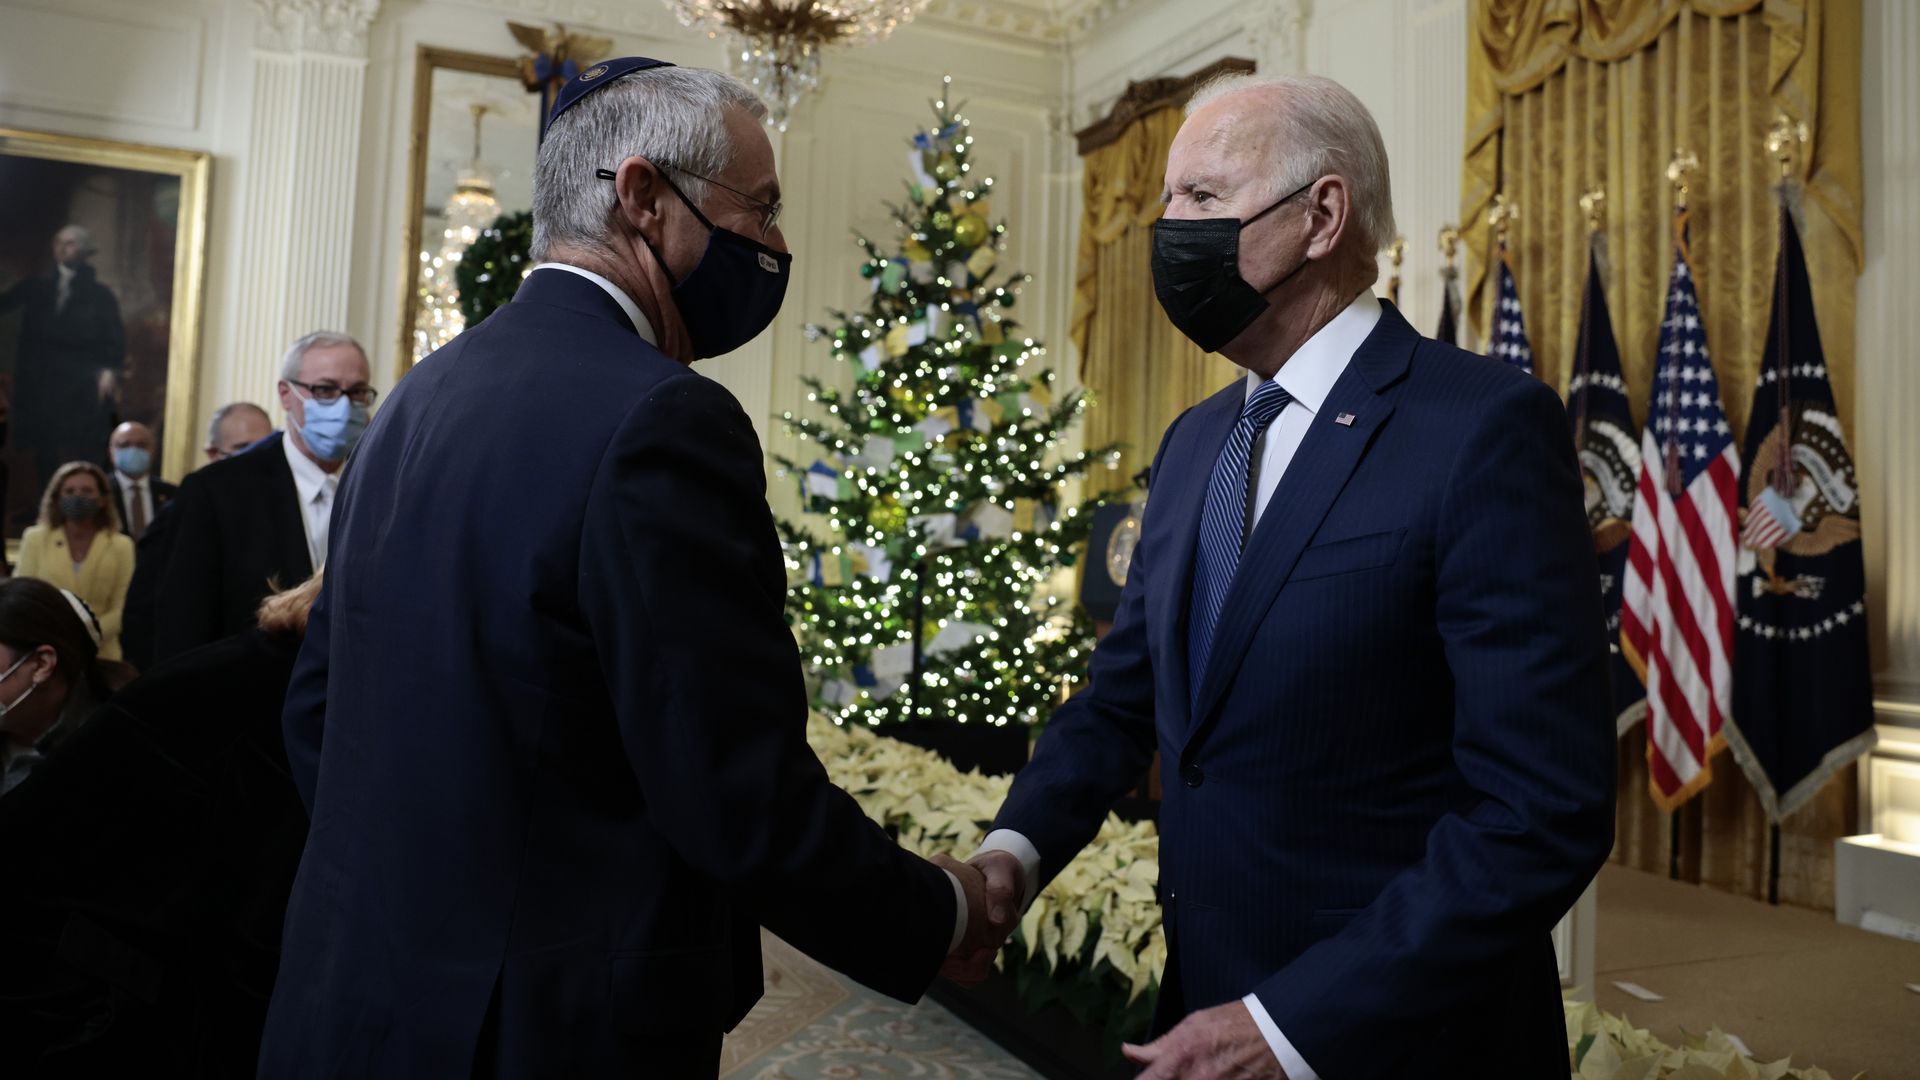 Biden shakes hands with Michael Herzog, the Israeli Ambassador to the United States after menorah lighting ceremony in celebration of Hanukkah in the East Room of the White House on December 01, 2021